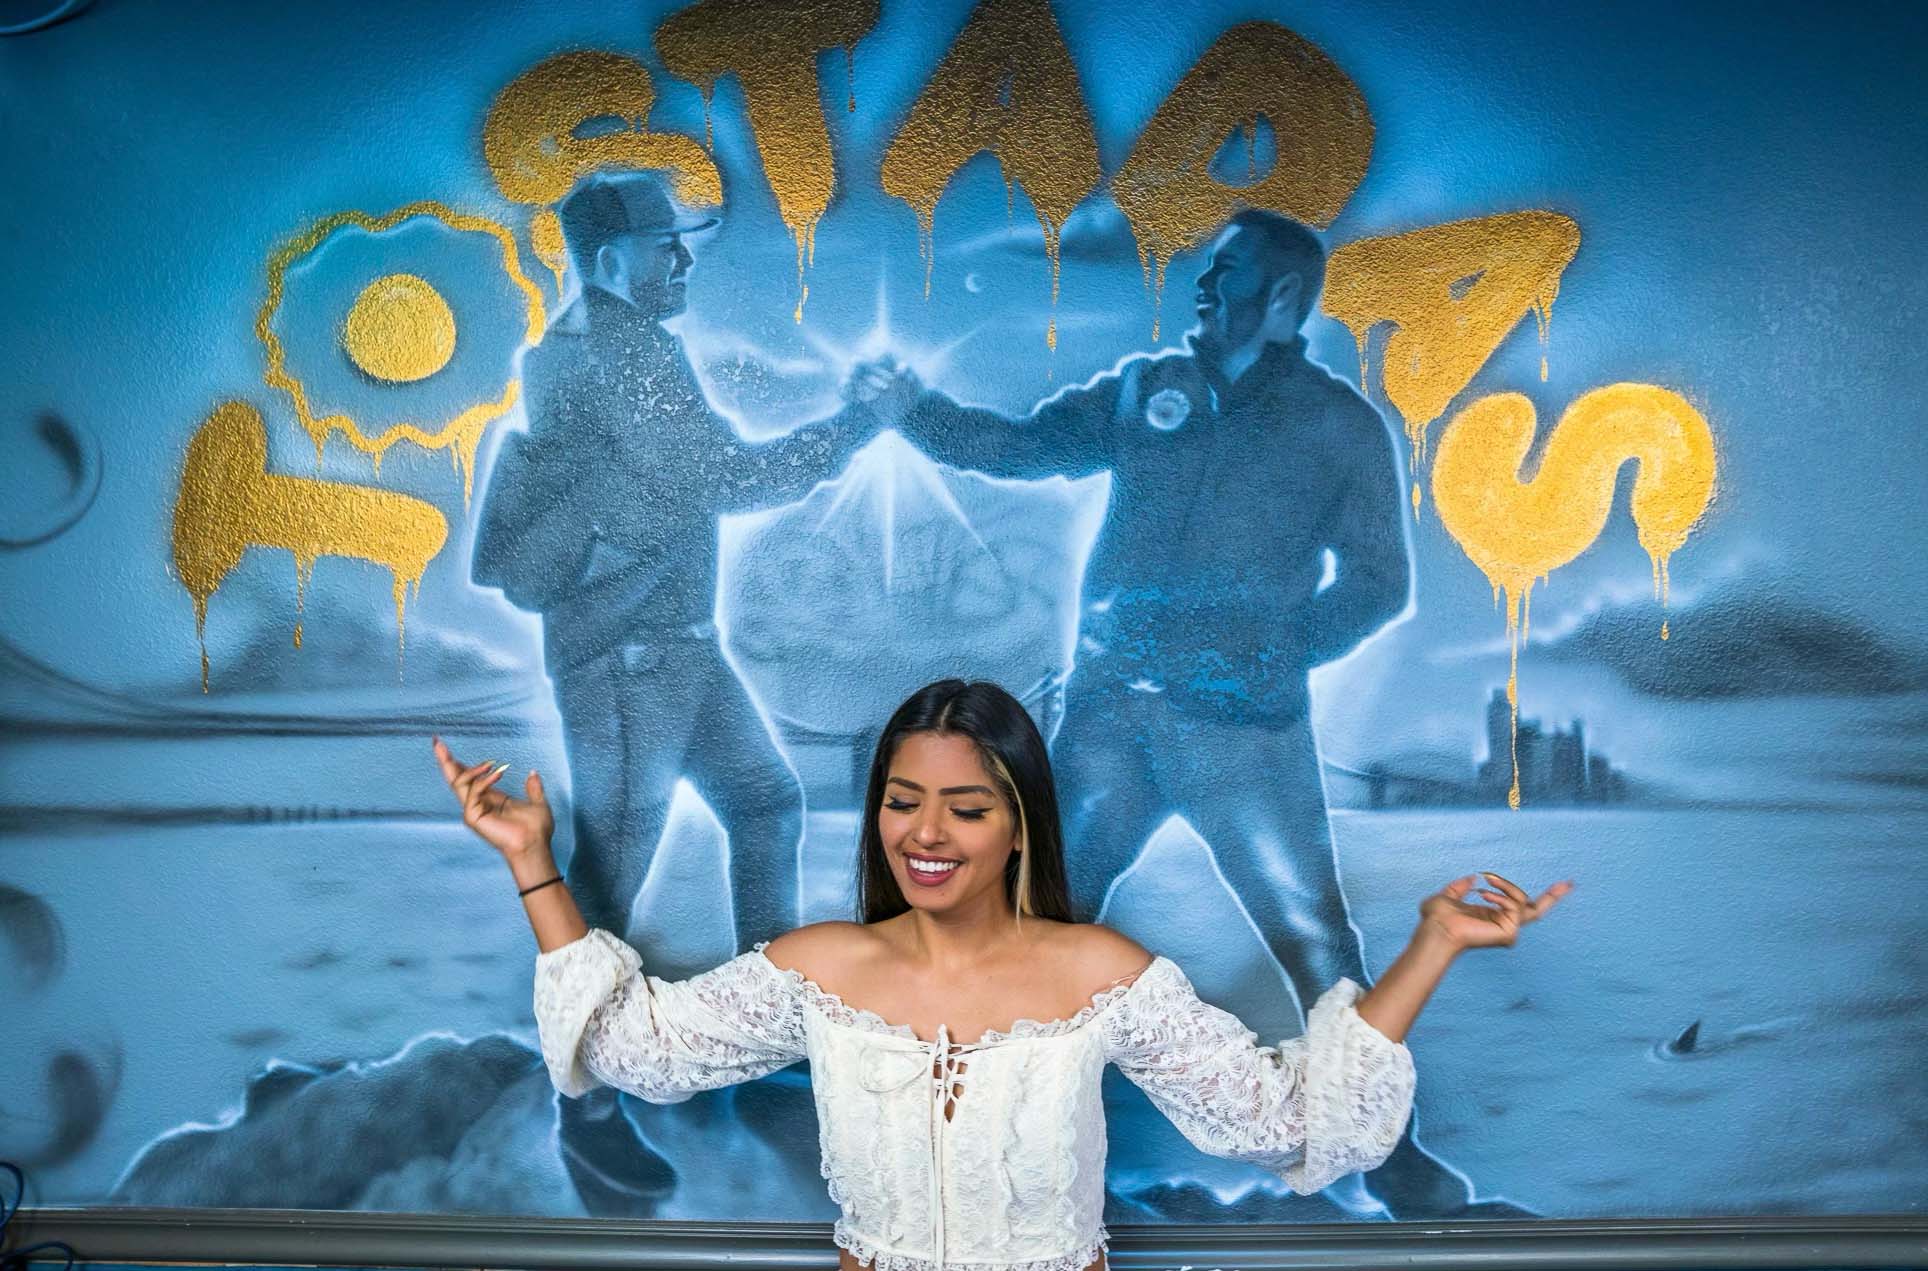 A young Latina stands in front of a mural painted inside a restaurant, depicting two undocumented Latino brothers shaking hands